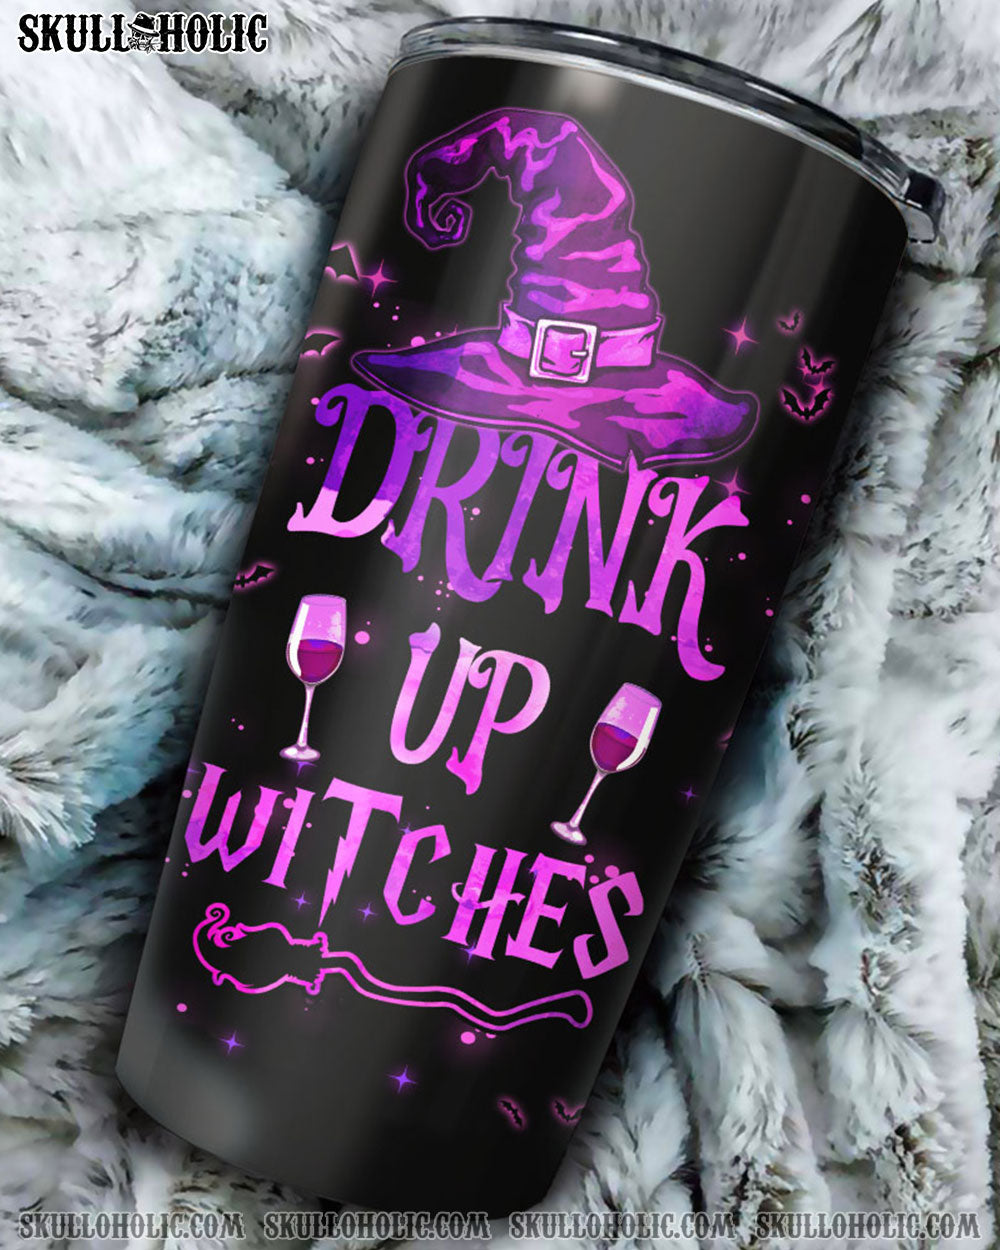 PERSONALIZED DRINK UP WITCHES TUMBLER - TLTM0208221